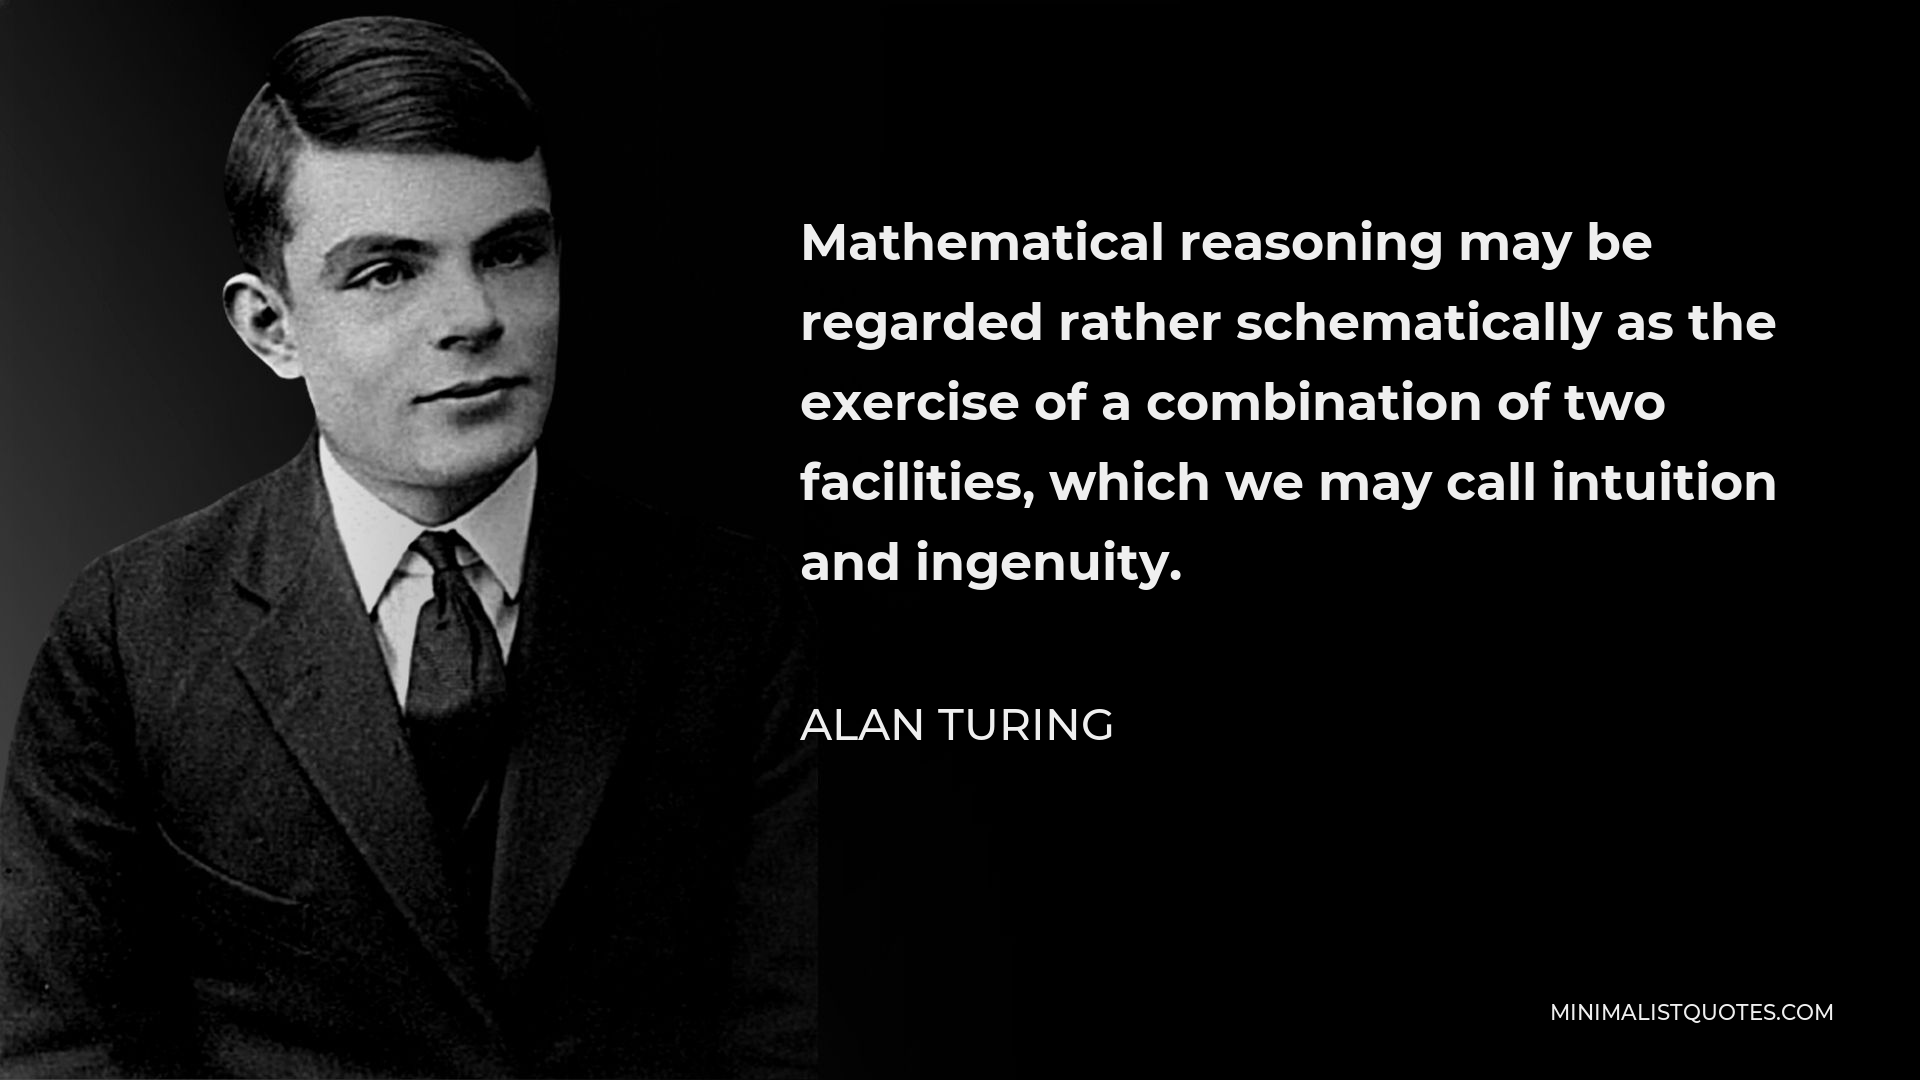 Alan Turing Quote - Mathematical reasoning may be regarded rather schematically as the exercise of a combination of two facilities, which we may call intuition and ingenuity.